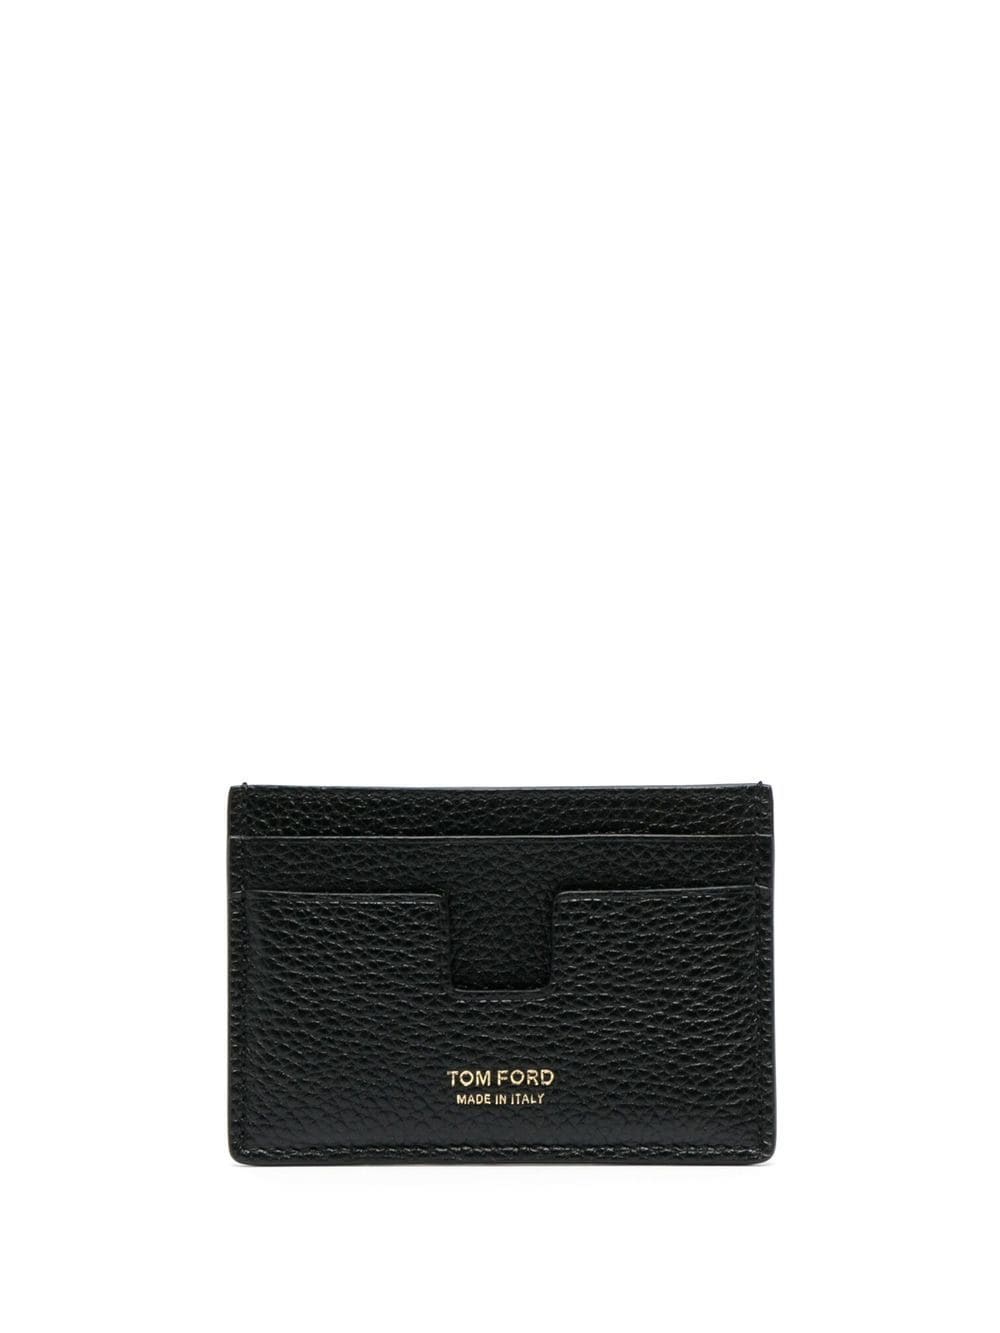 TOM FORD CARD HOLDER WITH LEATHER PRINT